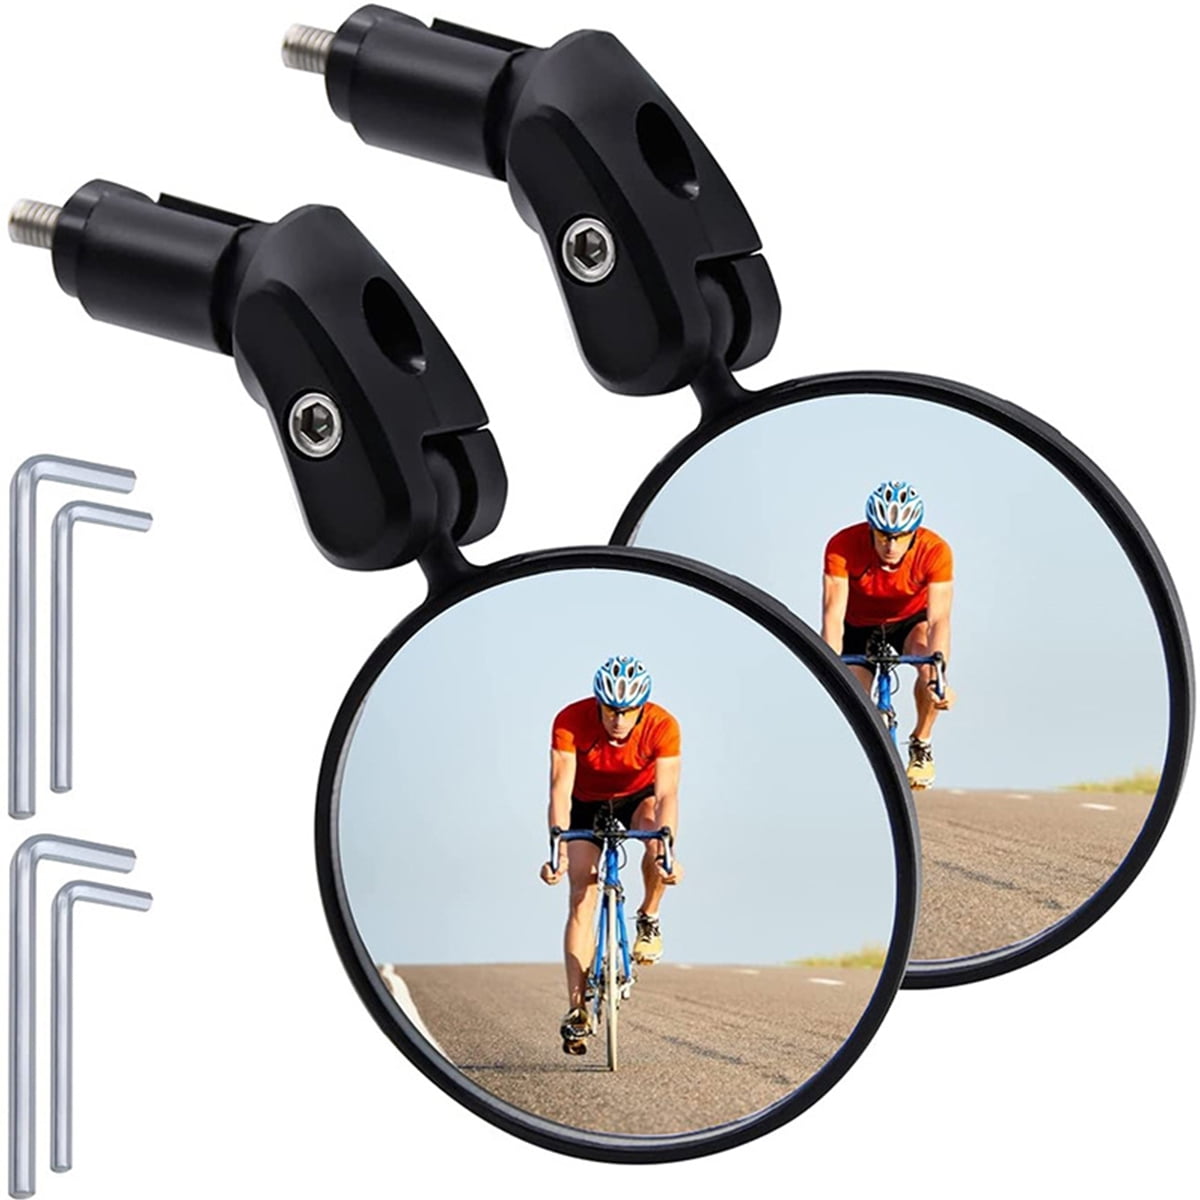 360°Rotation HD Plastic Convex Rearview Mirror Bike Mirrors Fits Handlebar of Hole Inside Within 17.4~22mm,Universal for Mountain Road Bike,Cycling,Ebike Bicycle 1 piece 